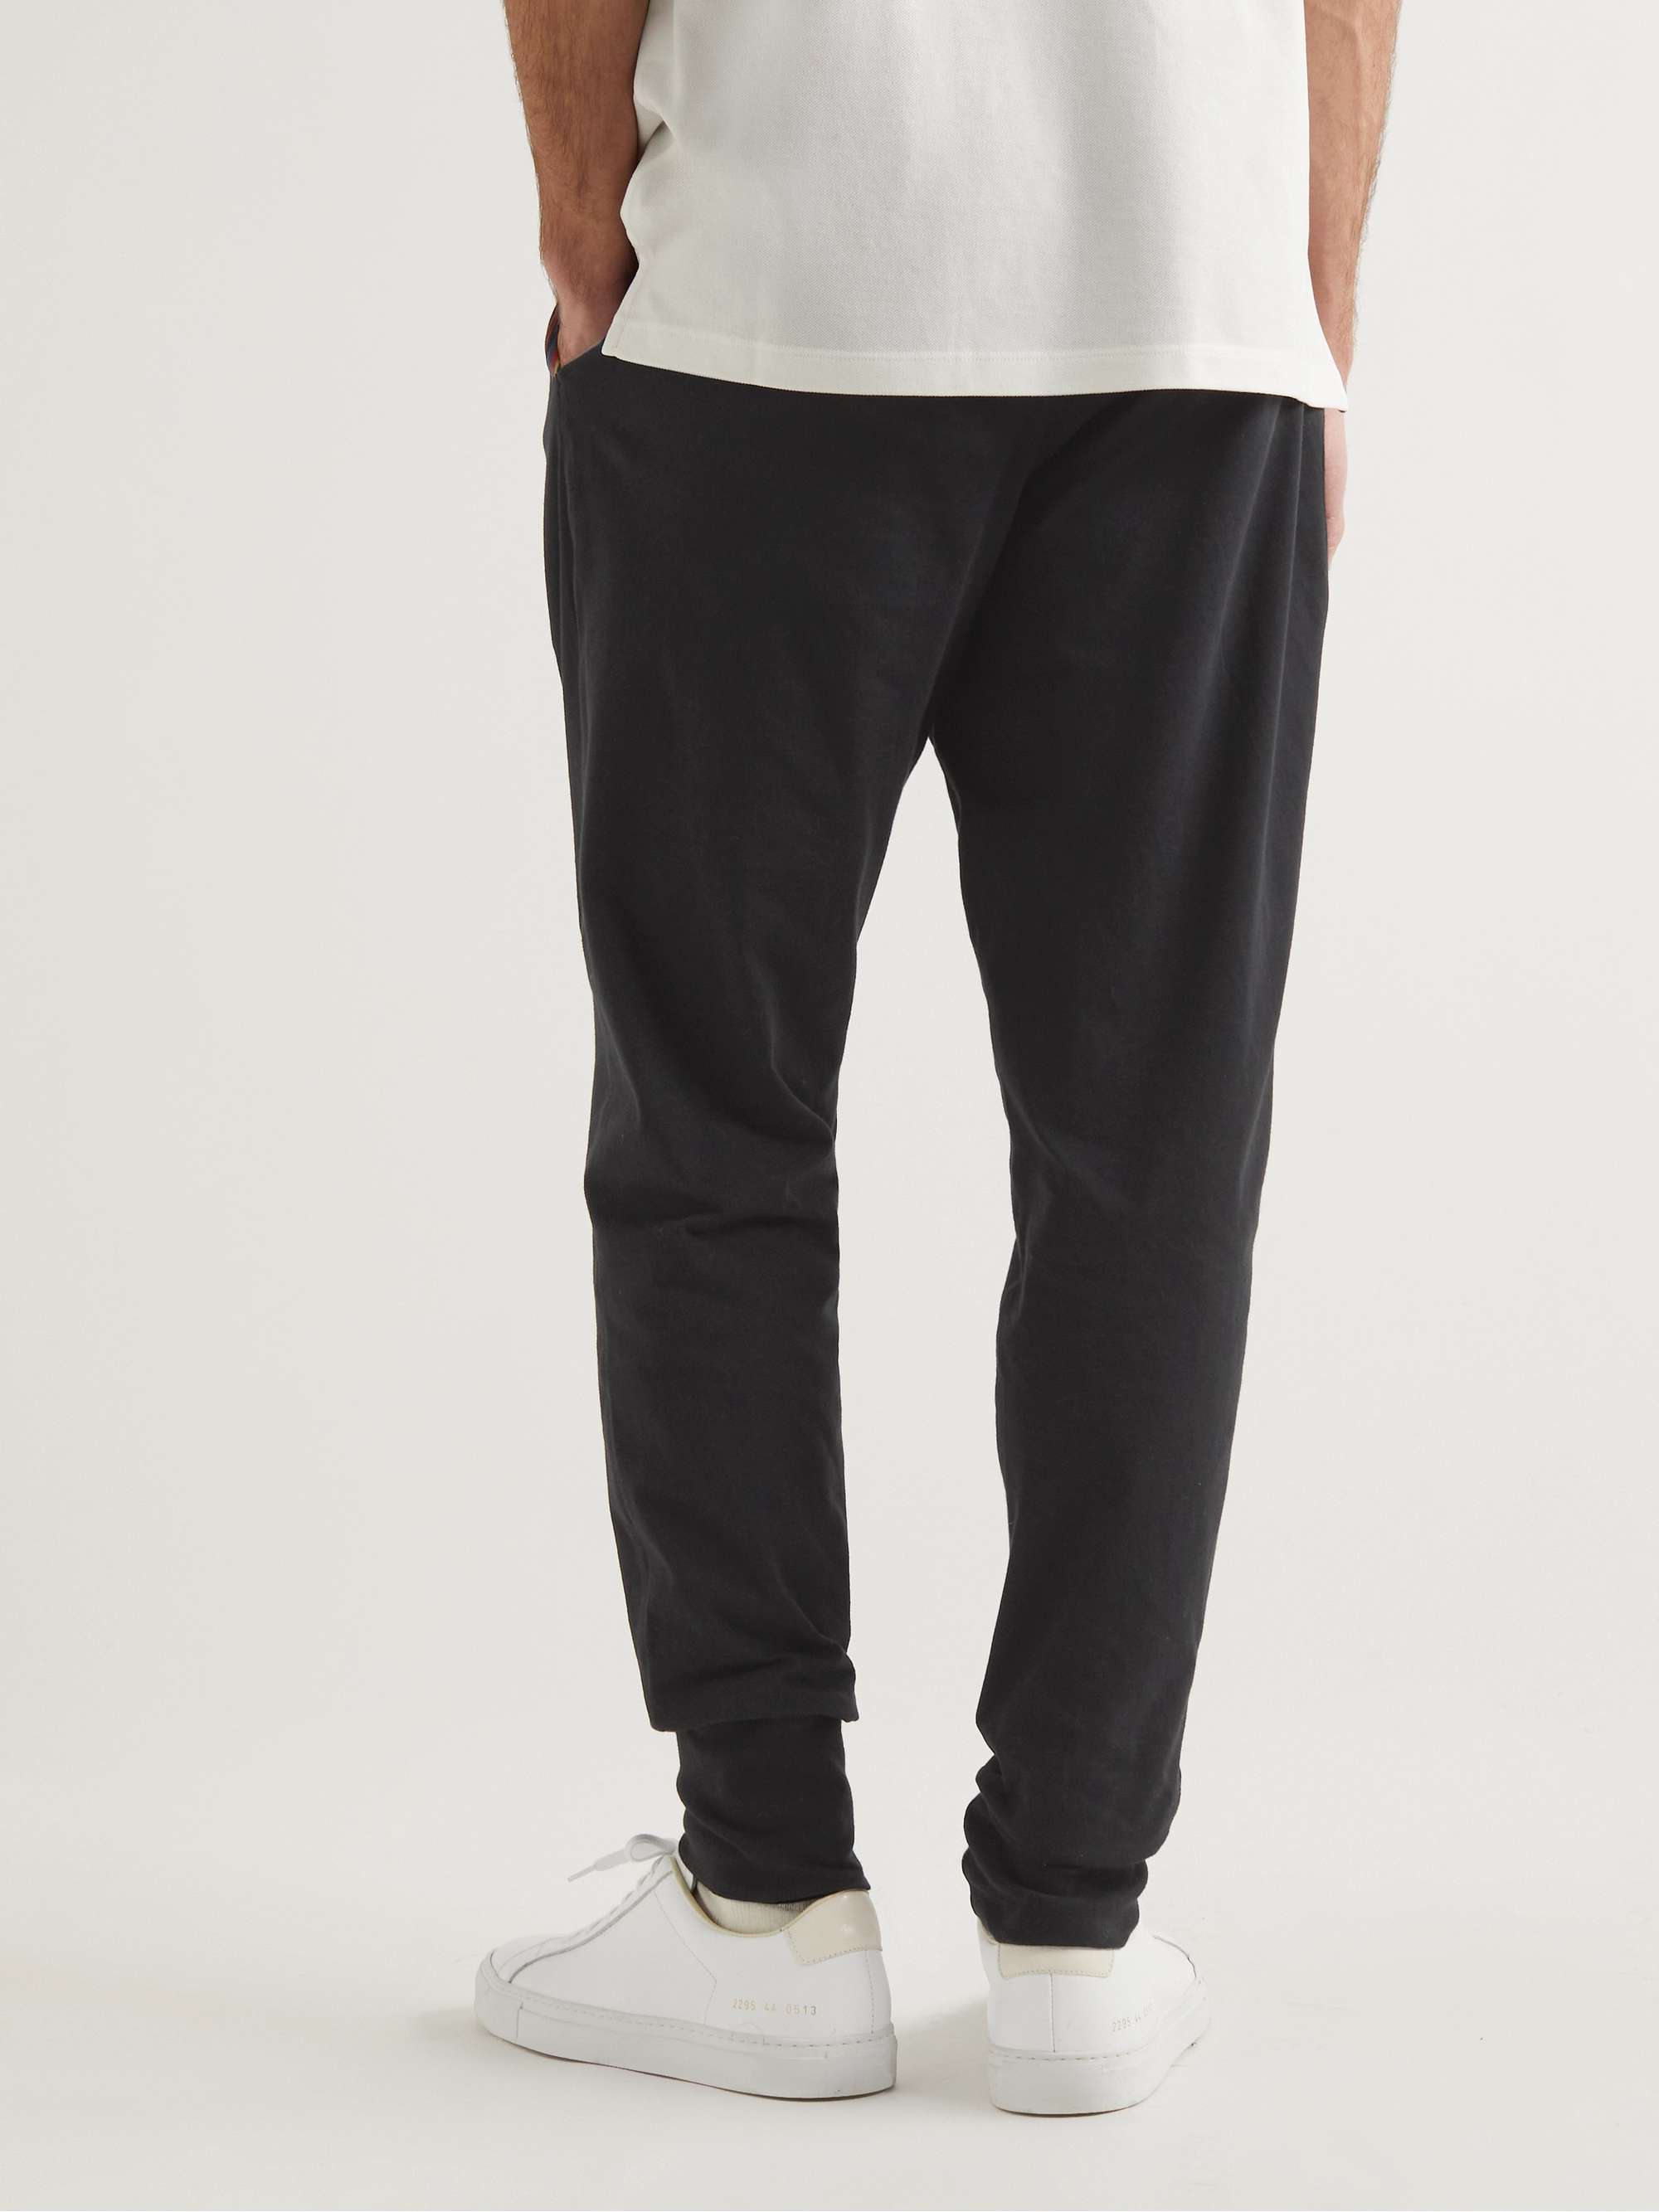 PAUL SMITH Tapered Striped Grosgrain-Trimmed Cotton-Jersey Sweatpants